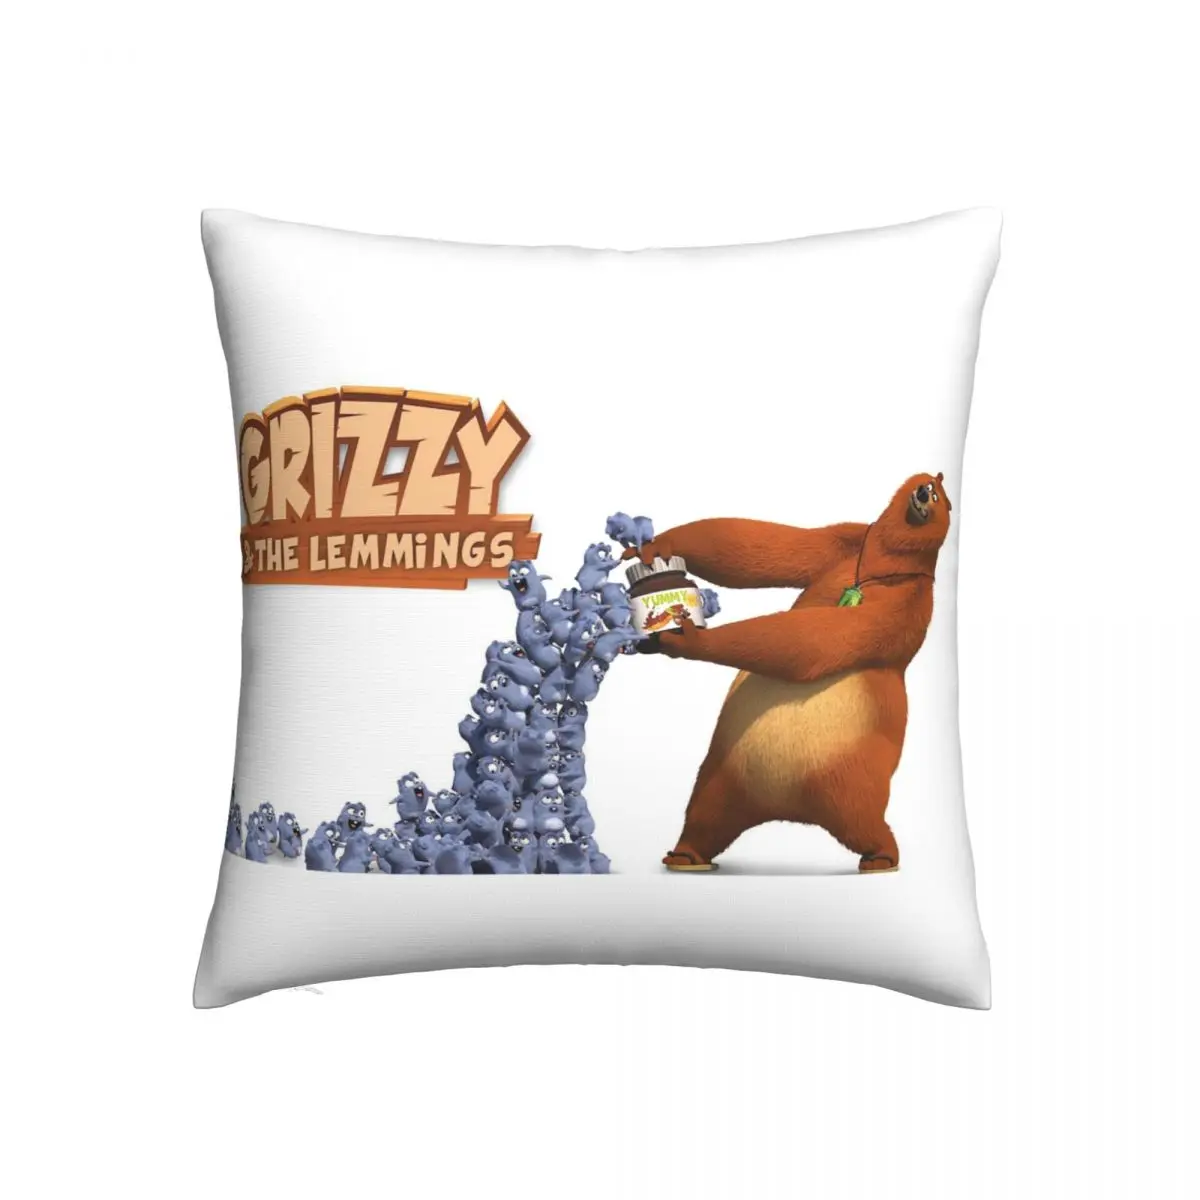 

Grizzy And The Lemmings Pillowcase Printing Polyester Cushion Cover Decoration colour kids Pillow Case Cover Home Dropshipping